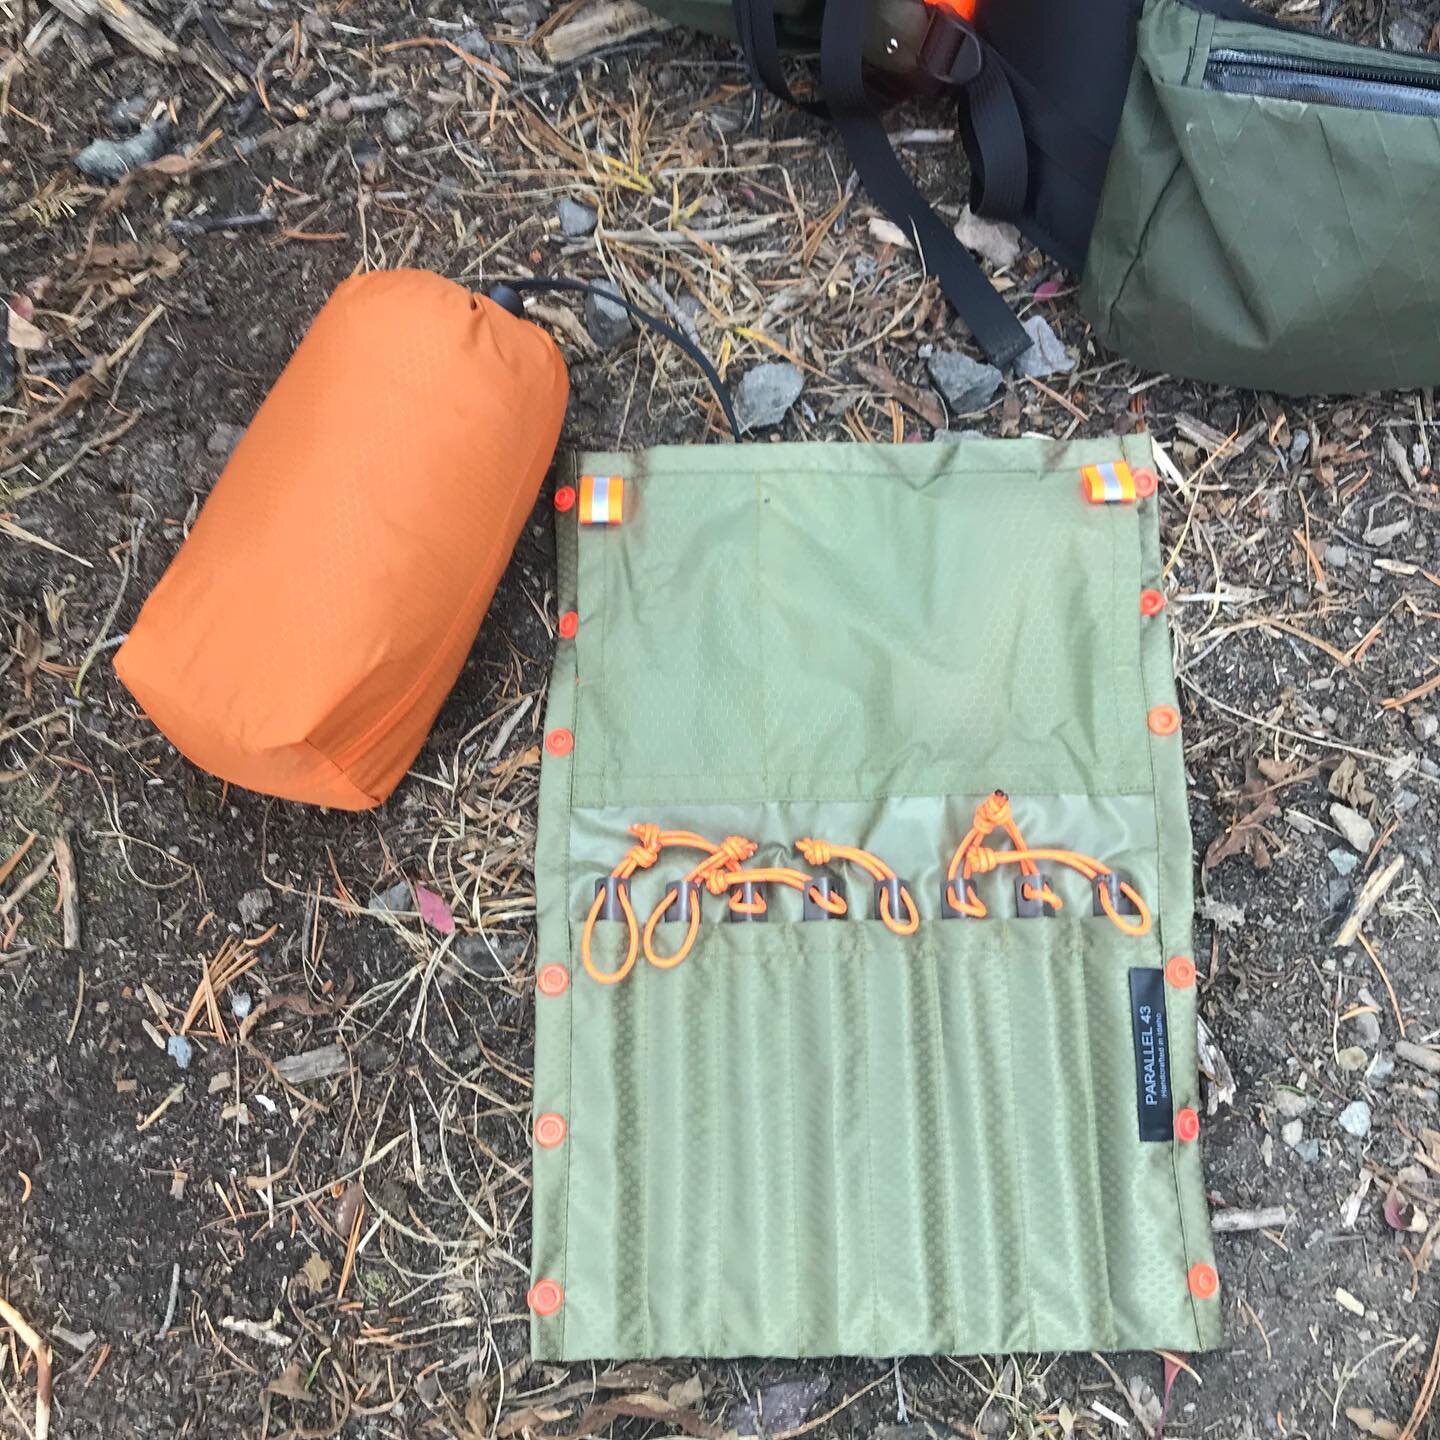 All in-stock Dirtbags are 30% off, today only. Keep the shelter hardware that gets dirty organized and protect your other gear. 

Customized Dirtbags also available. 

In stock gear ships in 1-2 business days. 

#idaho #idahome #backpacking #backpack